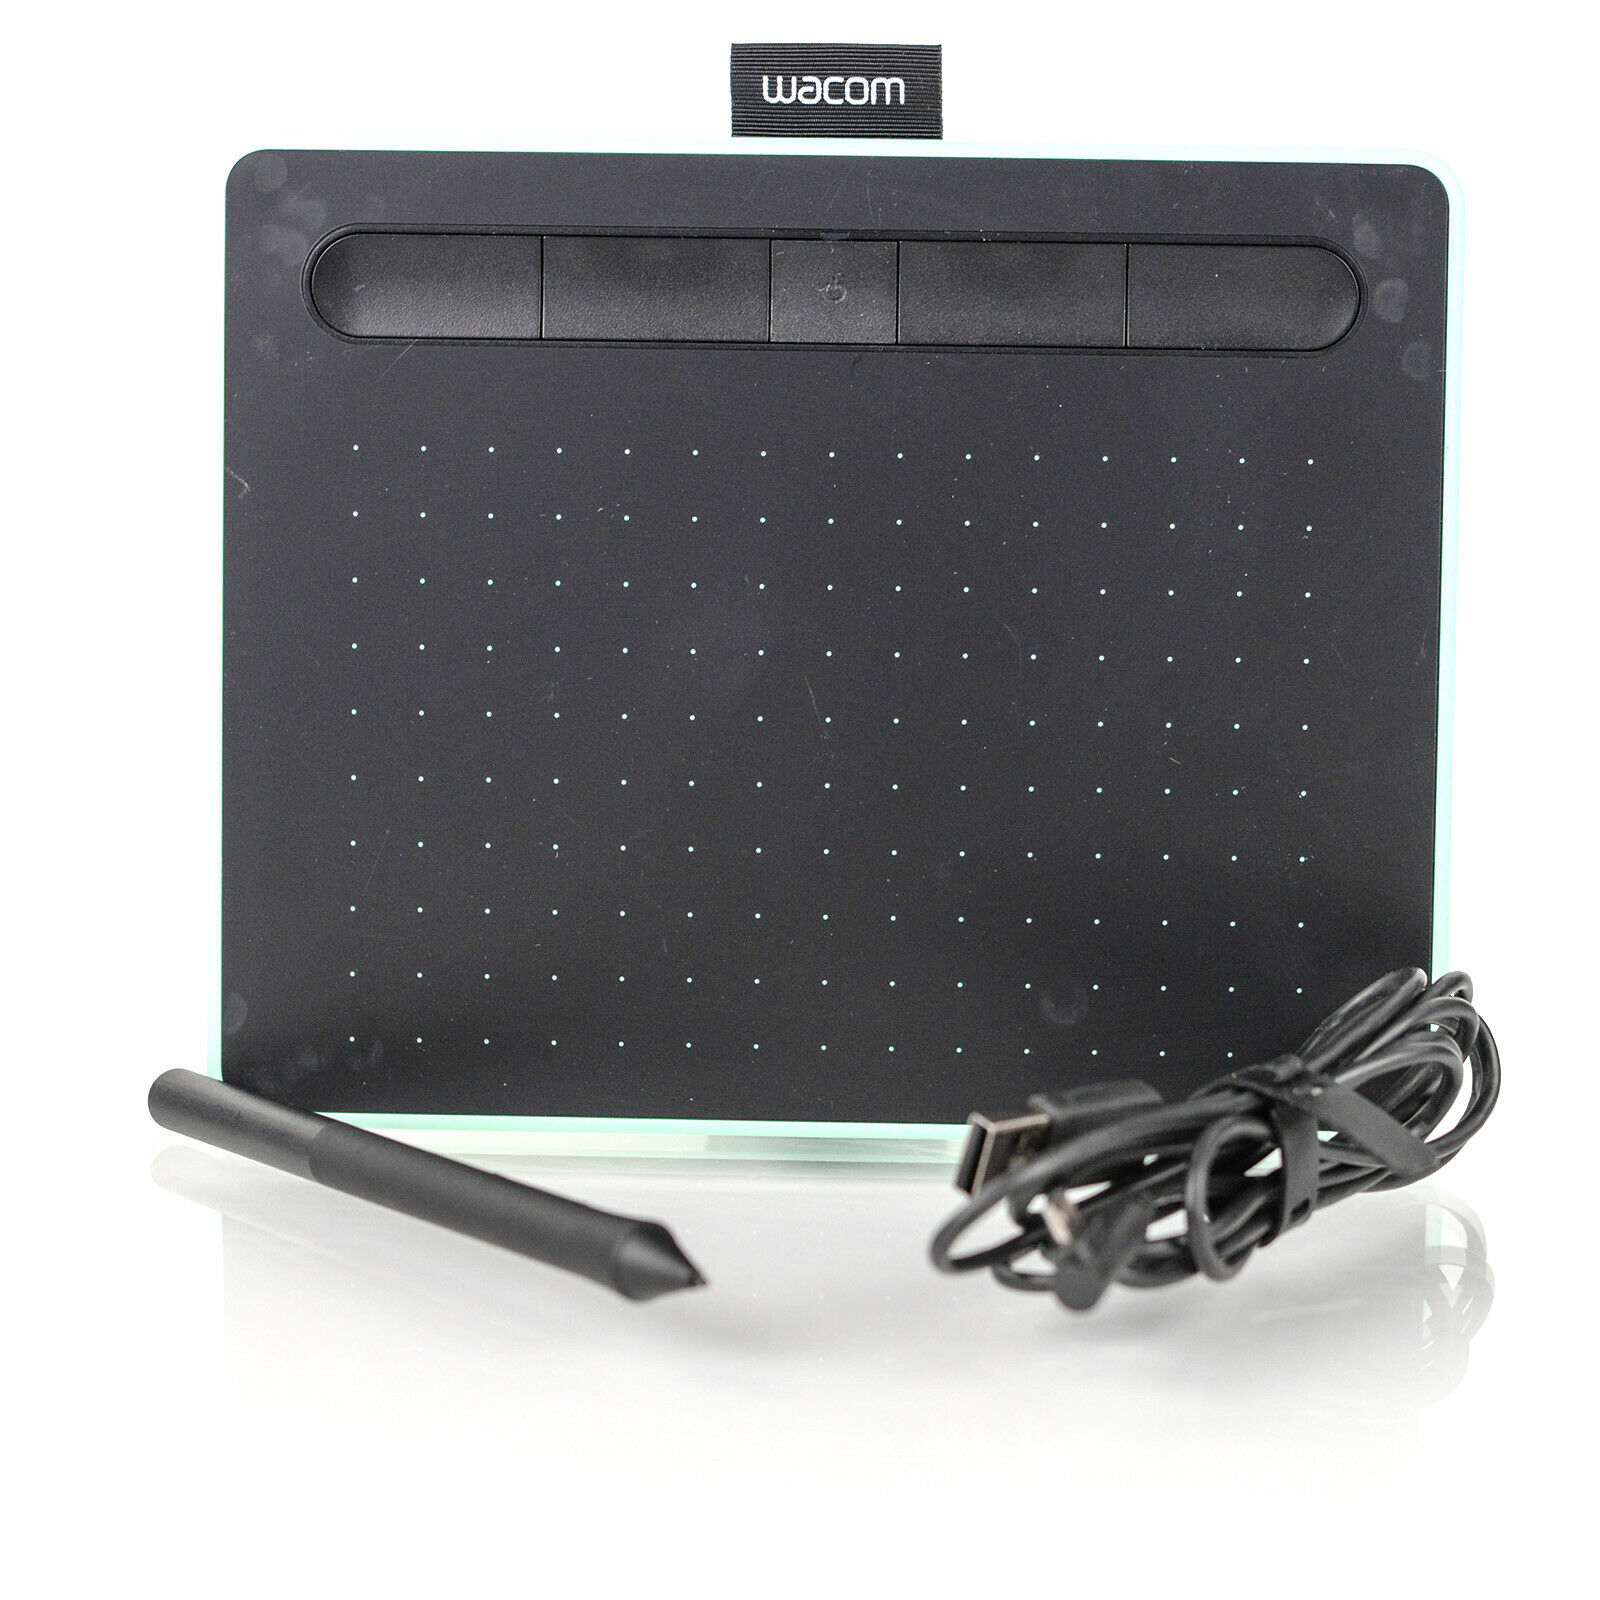 Wacom Intuos Wireless CTL-4100WL SMALL BLACK Bluetooth Graphics Drawing Tablet